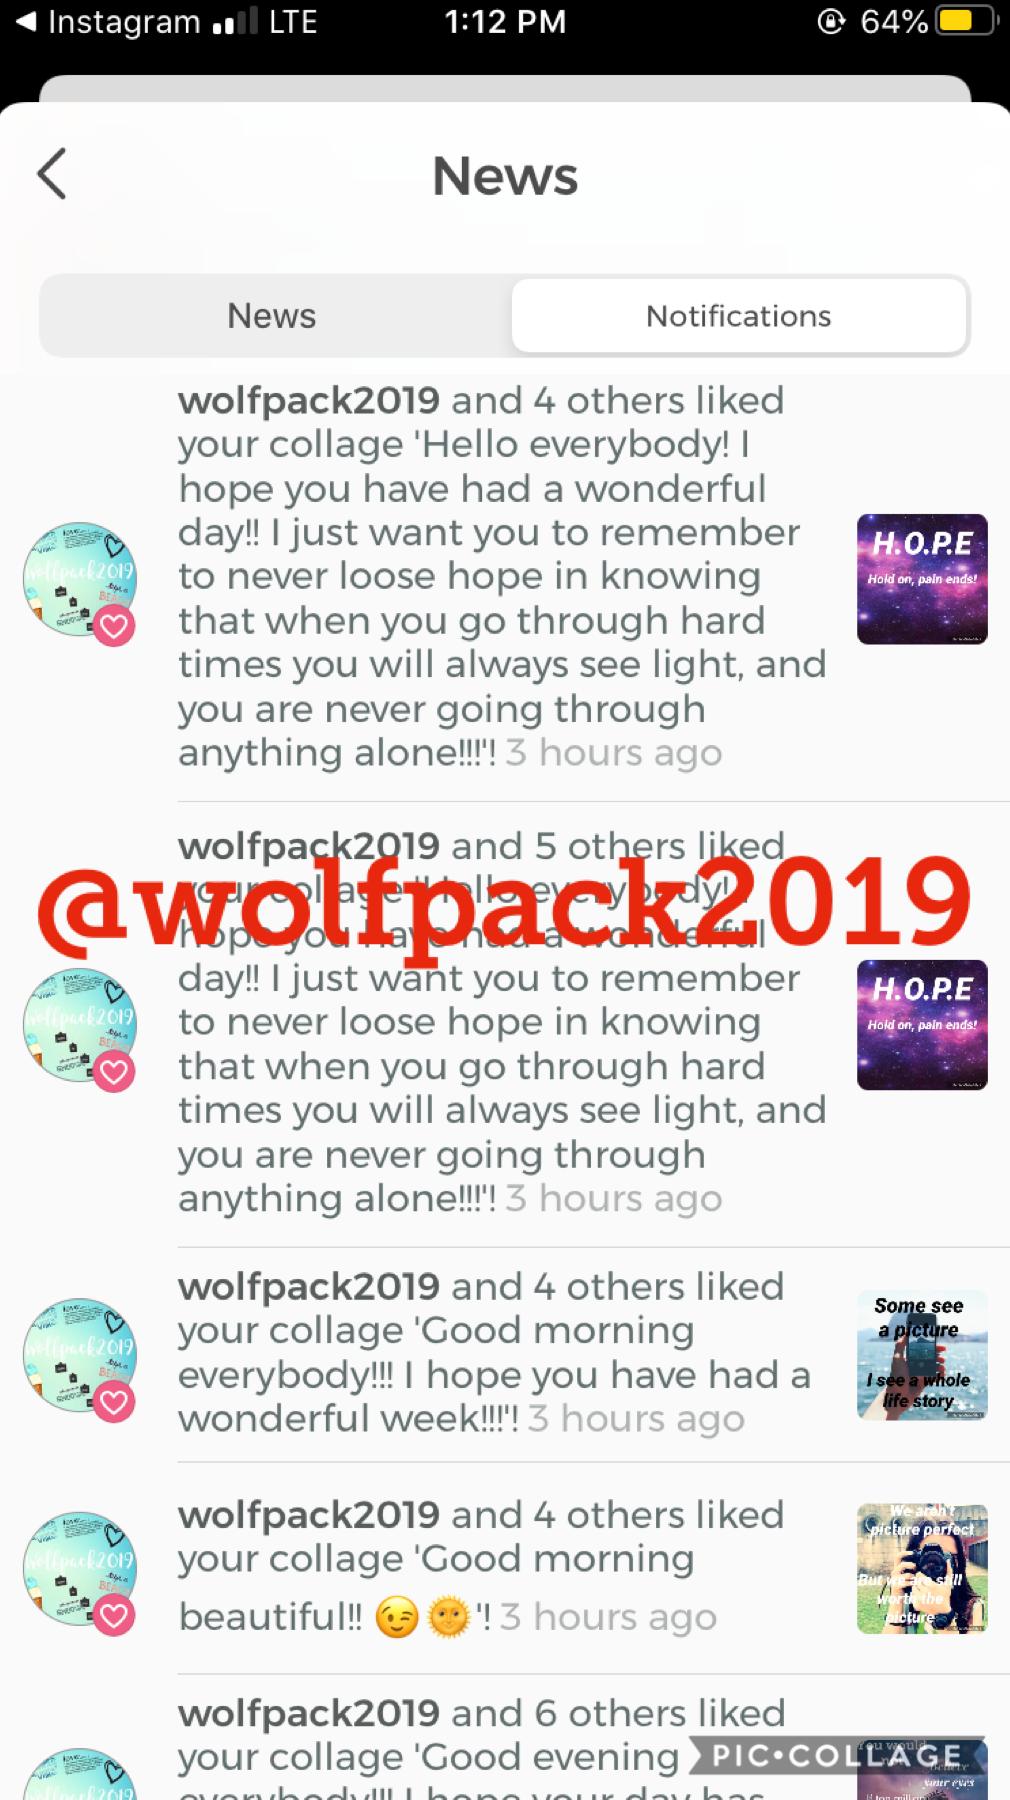 Shoutout to @wolfpack2019!! Thank you for the spam!!!